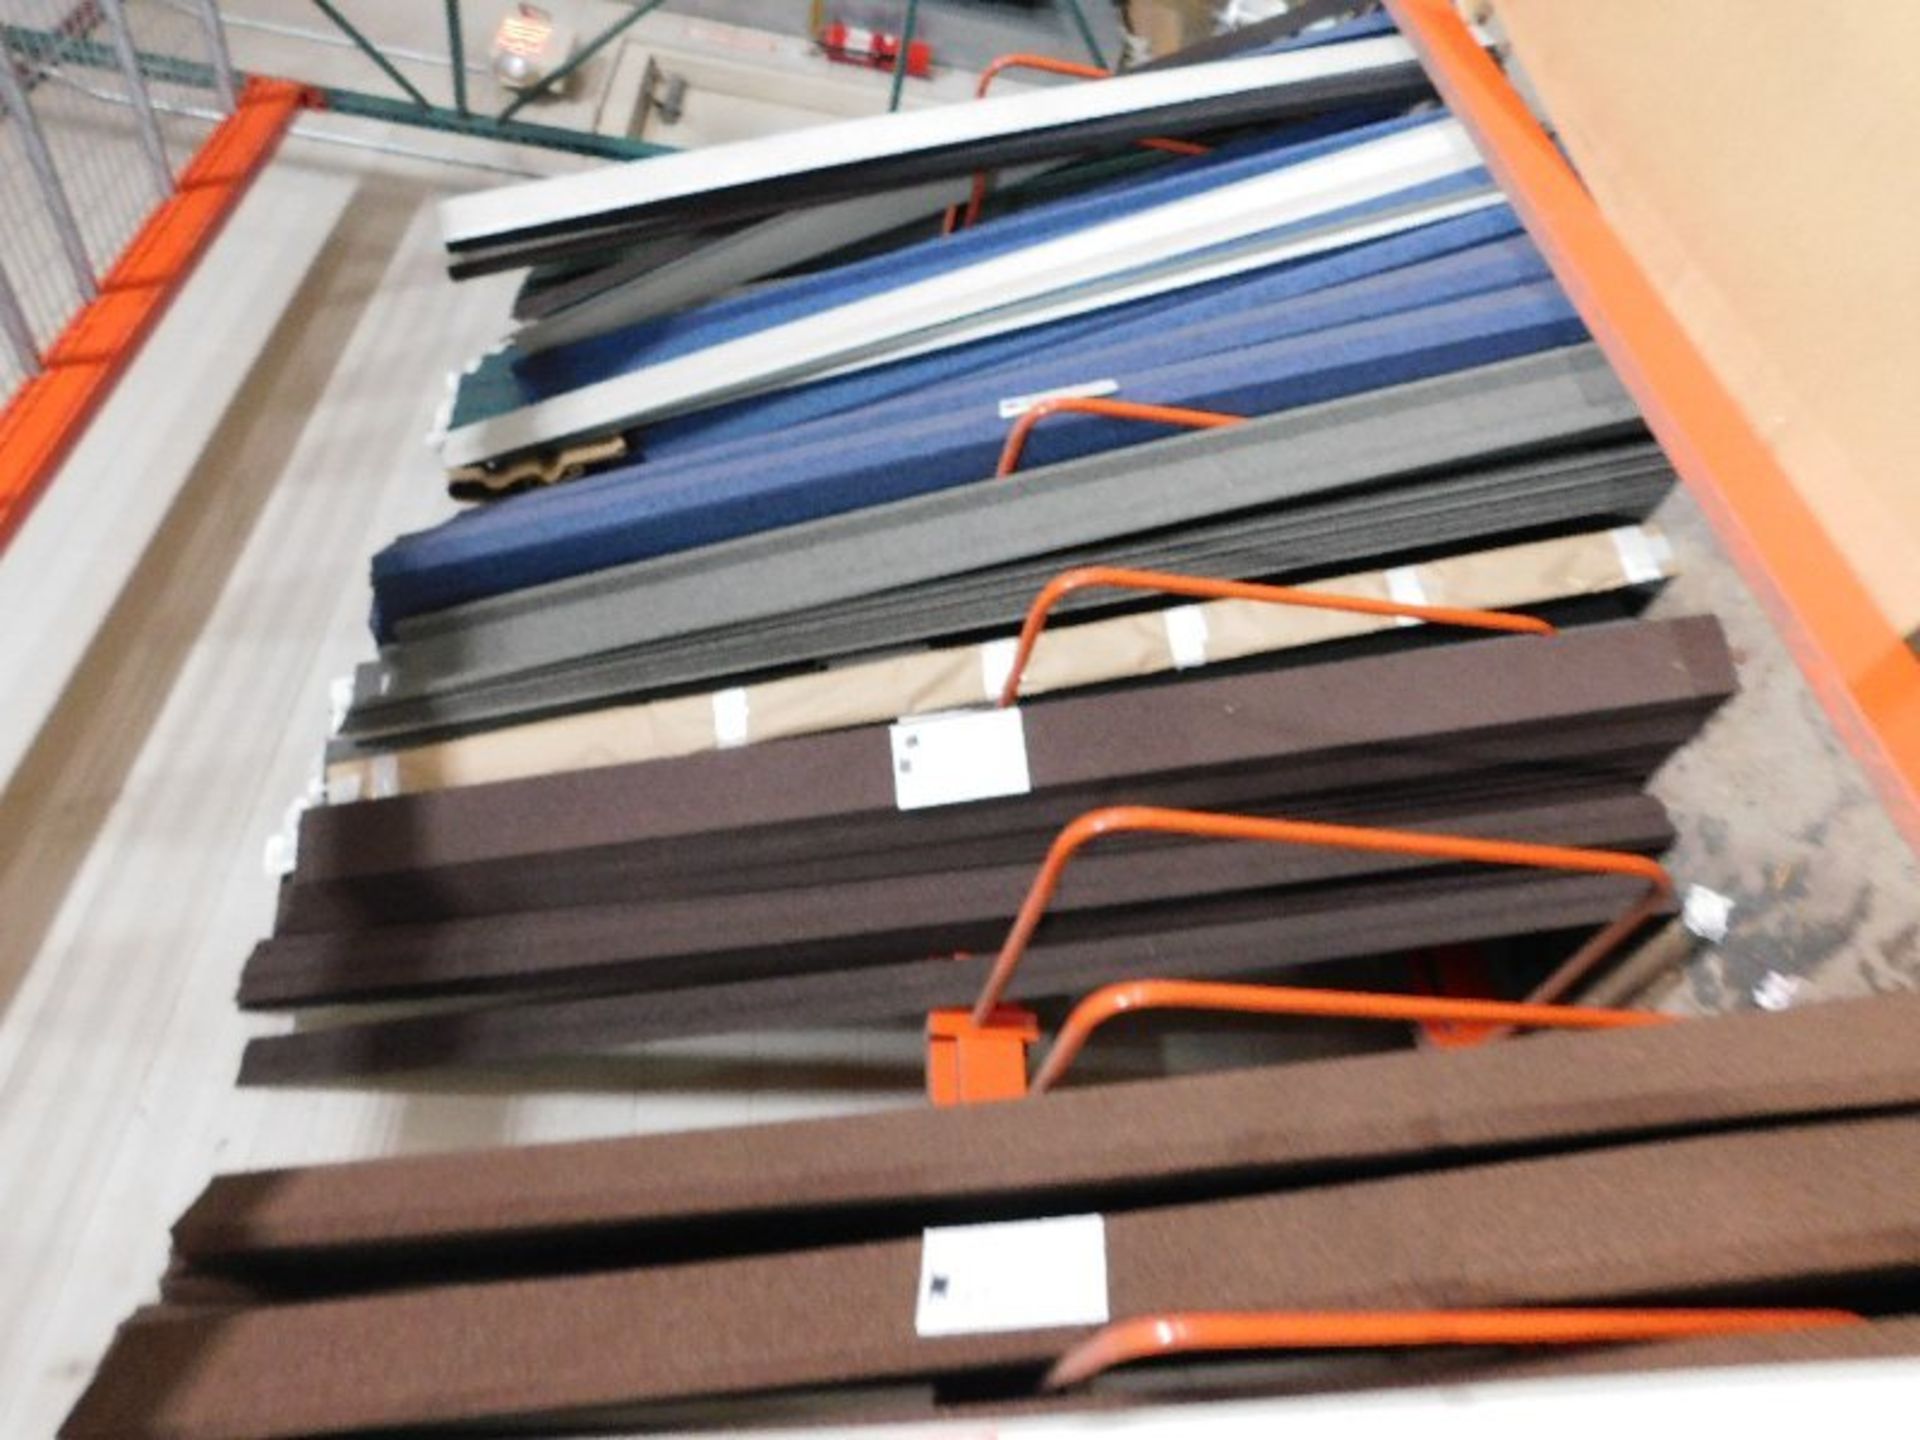 Contents Rack, Various Trim and Valley for Roofing, Midnight Blue, Mahogany, Timber wood, etc.